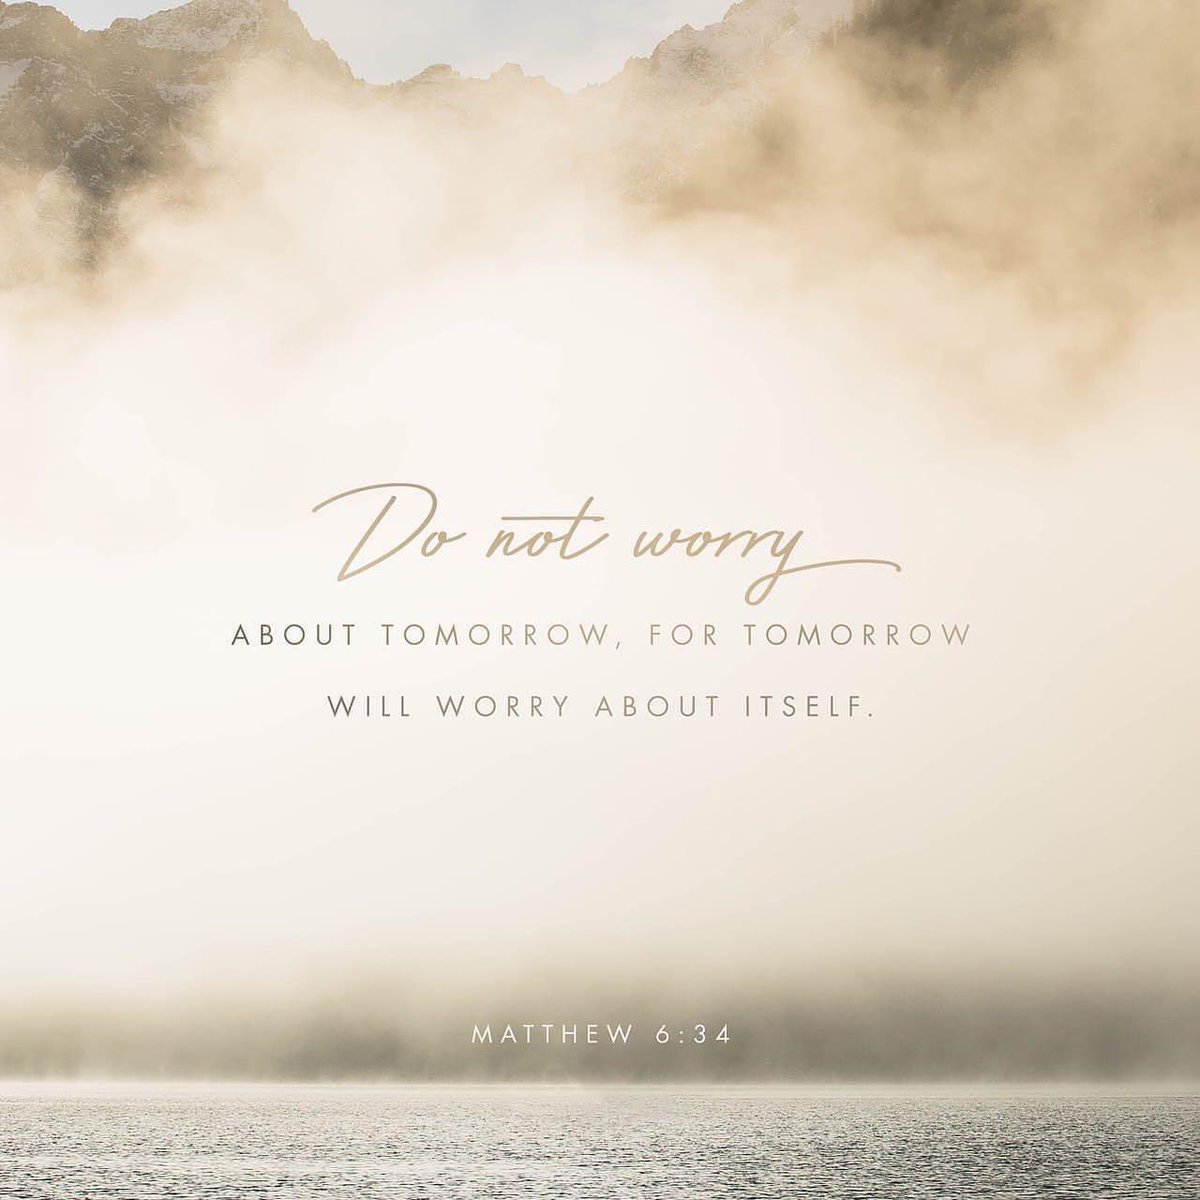 Don’t worry. God is in control. ❤
#dontworry #dontbeafraid #godiswithyou #godisincontrol #youversion